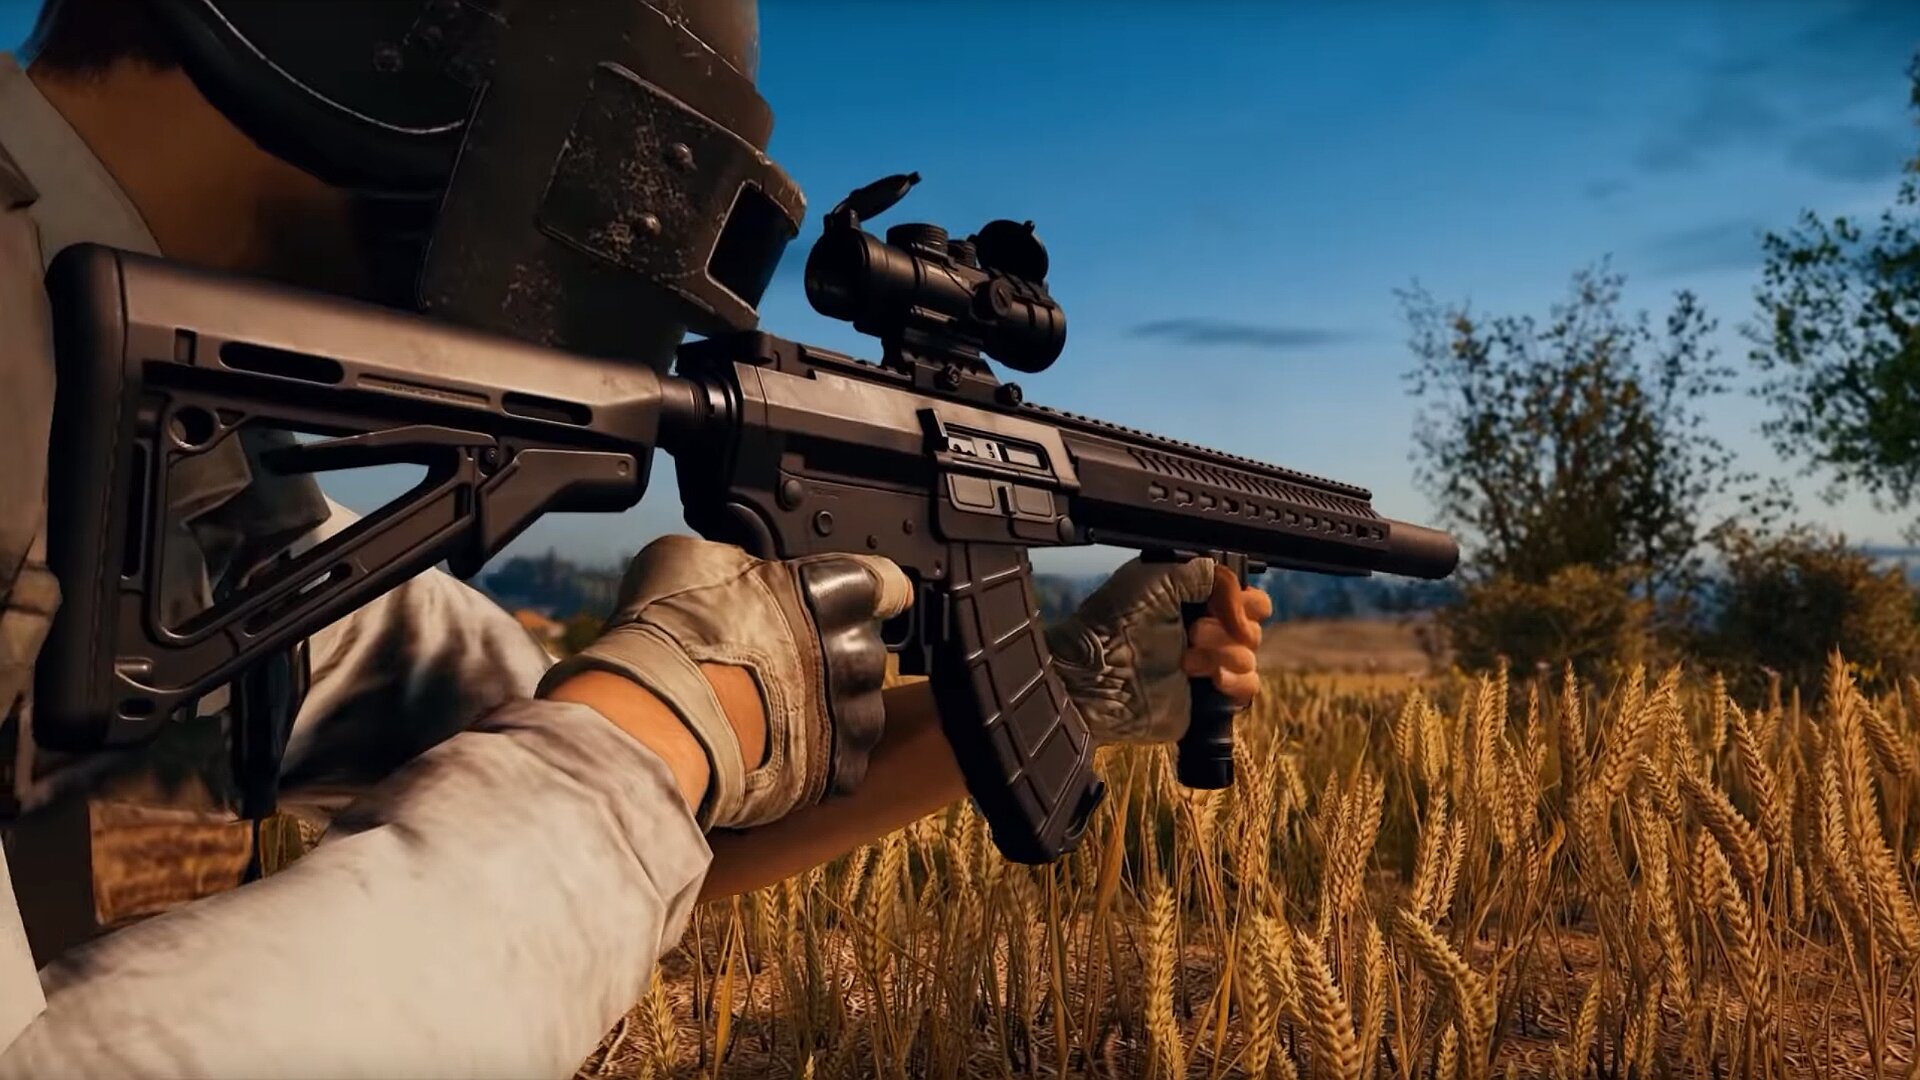 PUBG investigated the activities and software being used by PUBG players that would enable them to cheat and found several notable players.